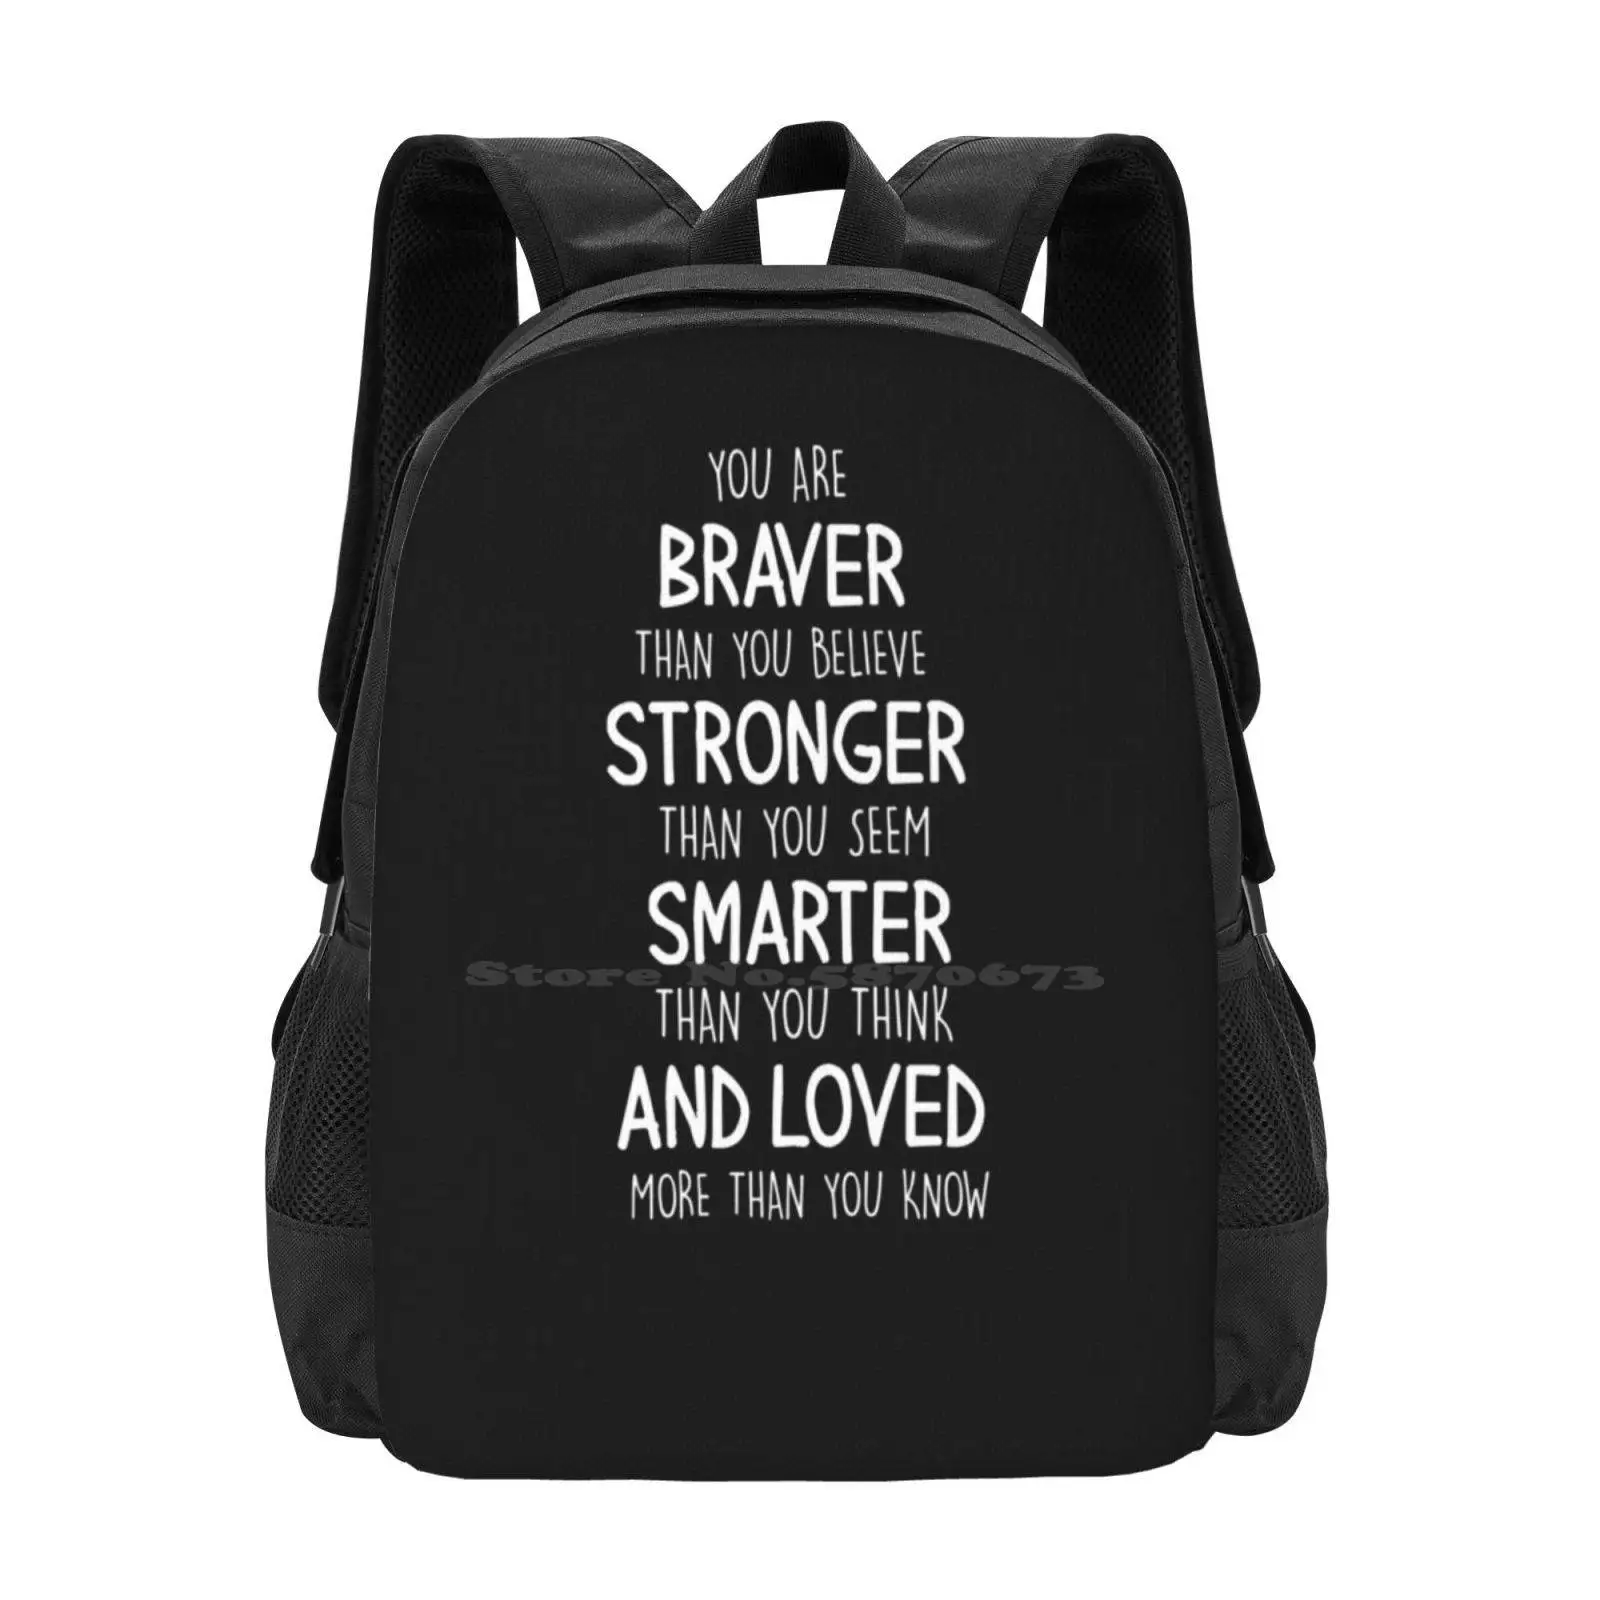 

You Are Braver Than You Believe Stronger Than You Seem Smarter Than You Think And Loved More Than You Know Hot Sale Backpack